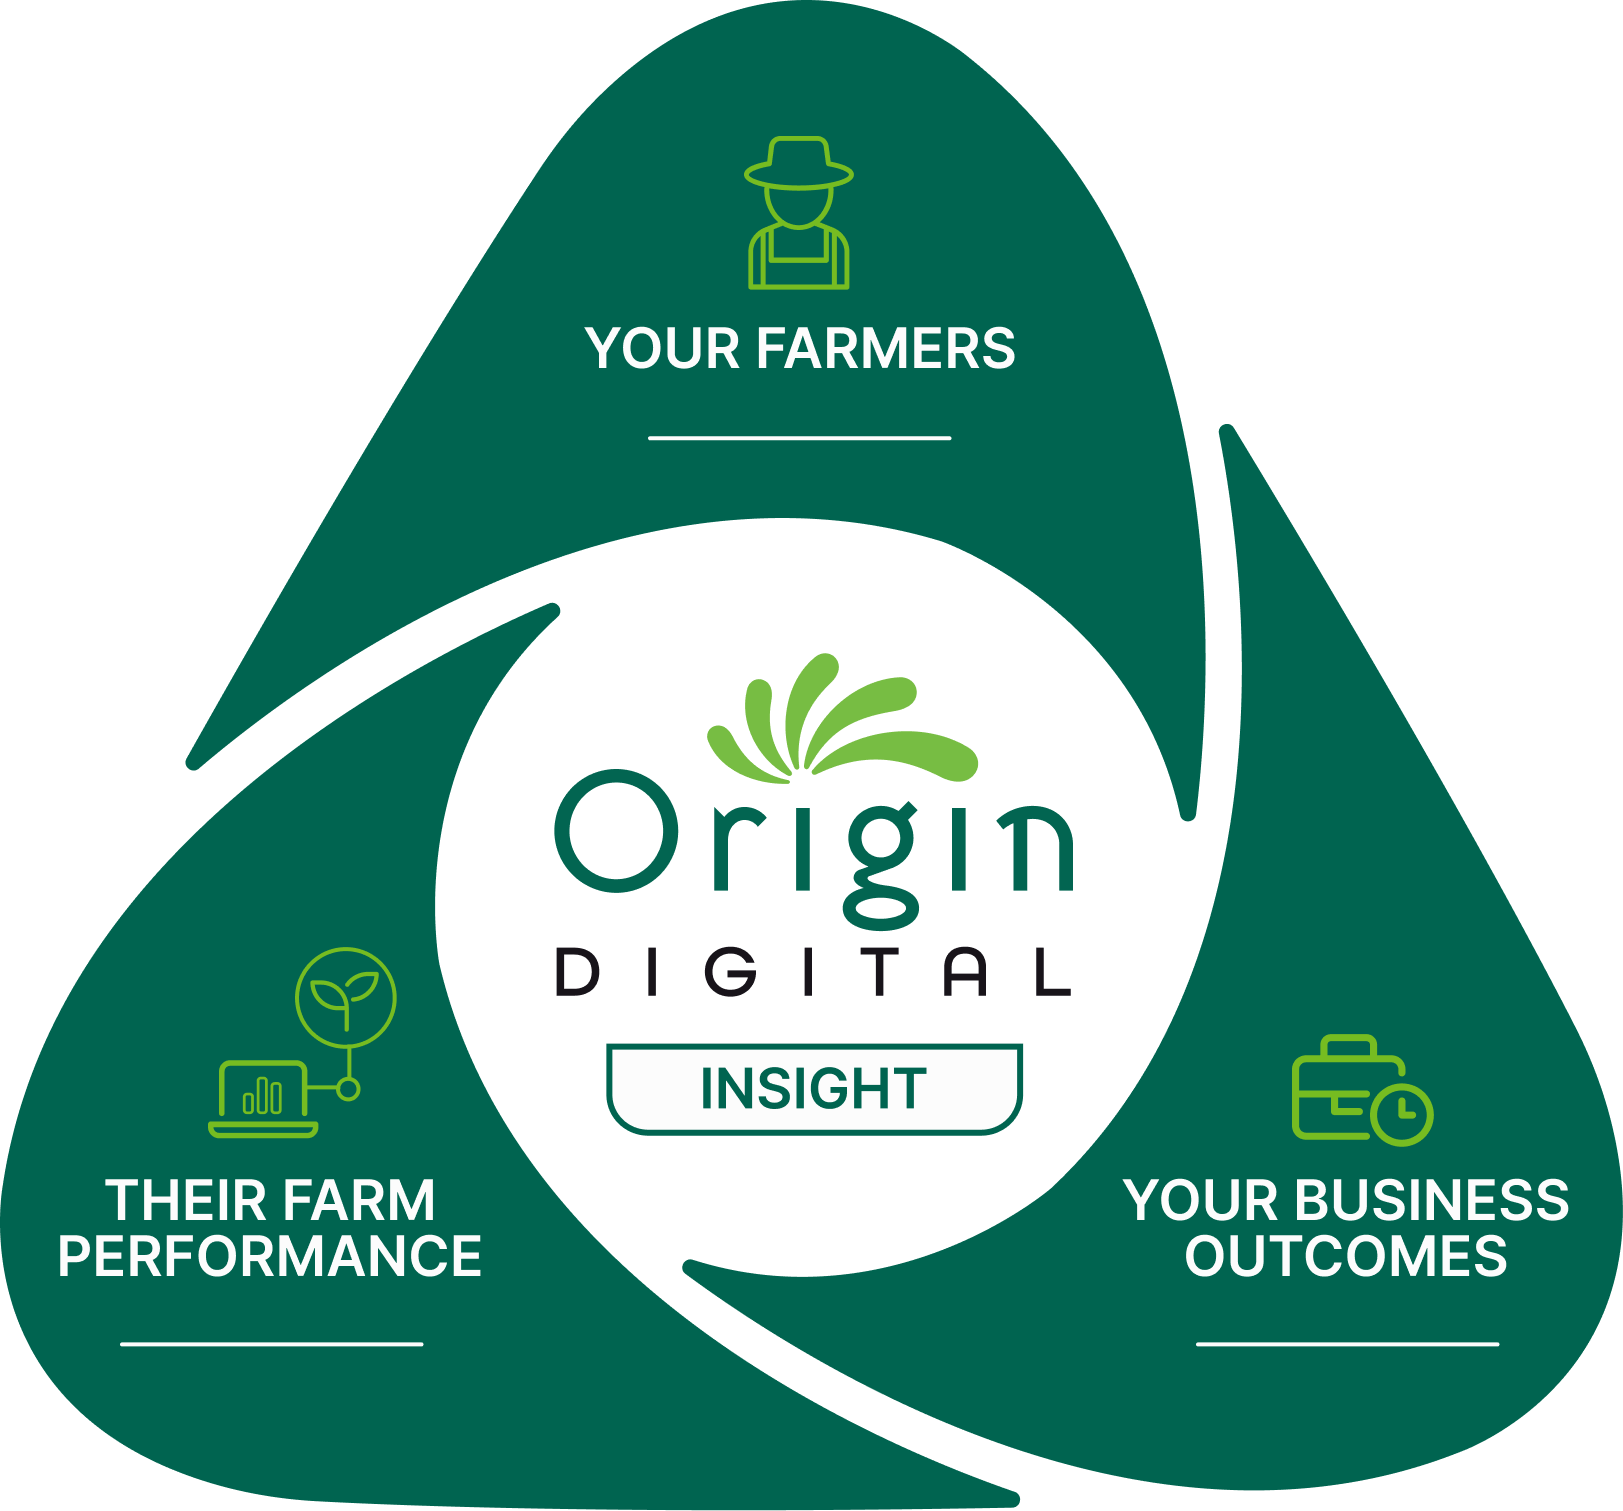 Origin Digital Insight for Agribusiness: Your Farmers, Their Farm Performance, Your Business Outcomes